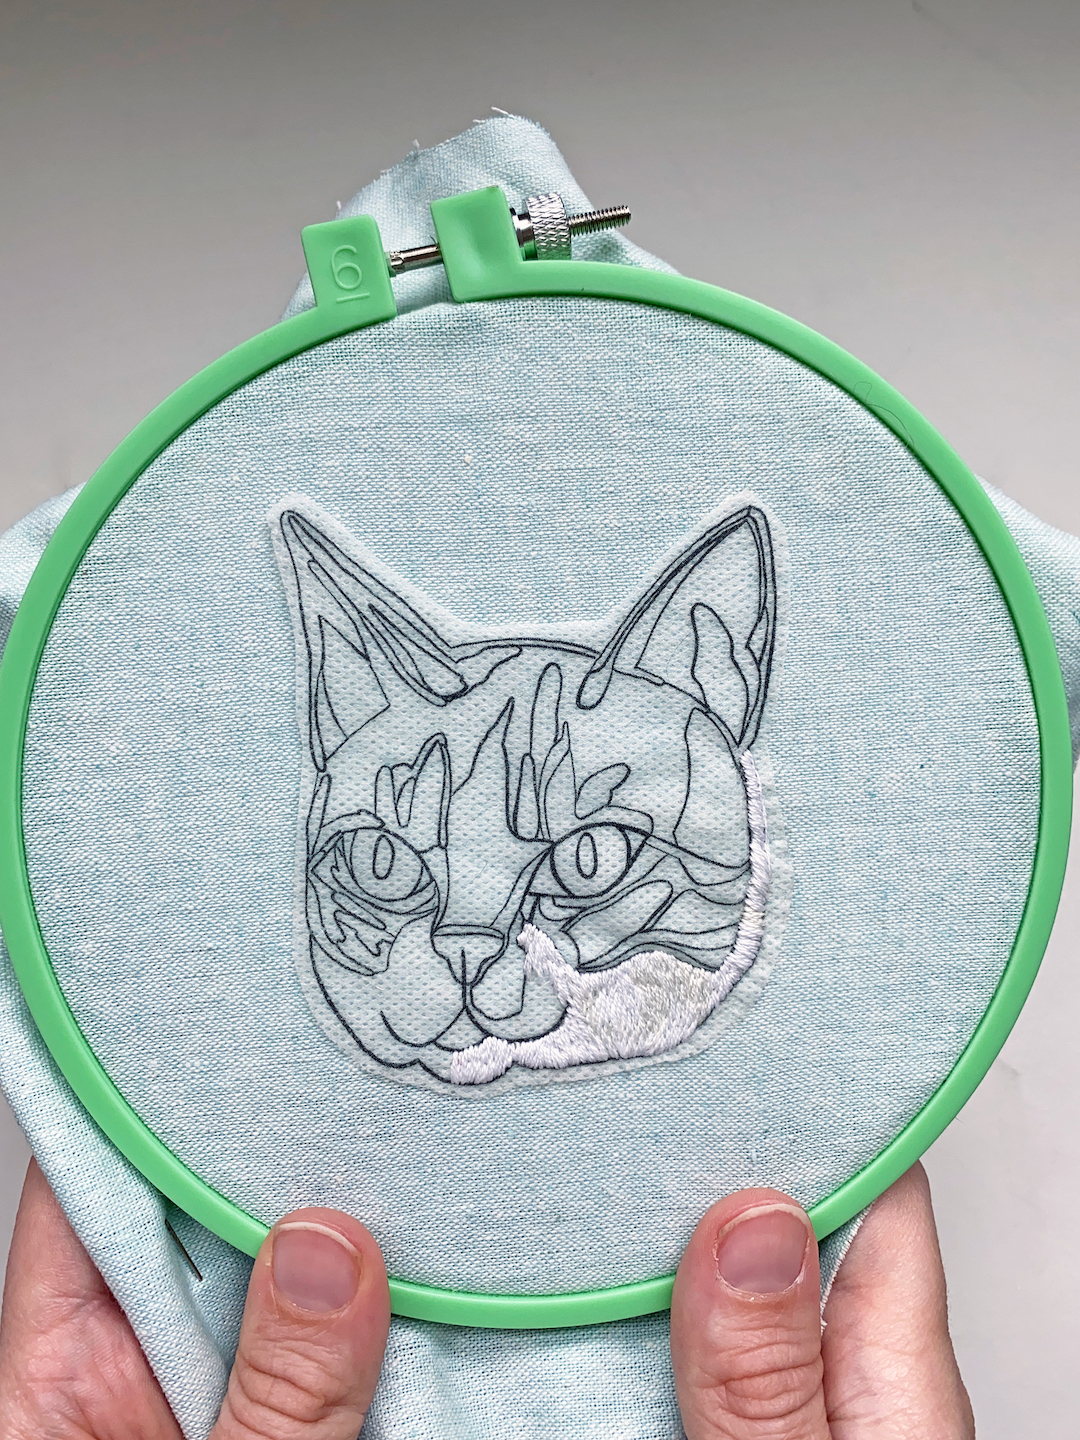 Custom embroidered patch of a cat